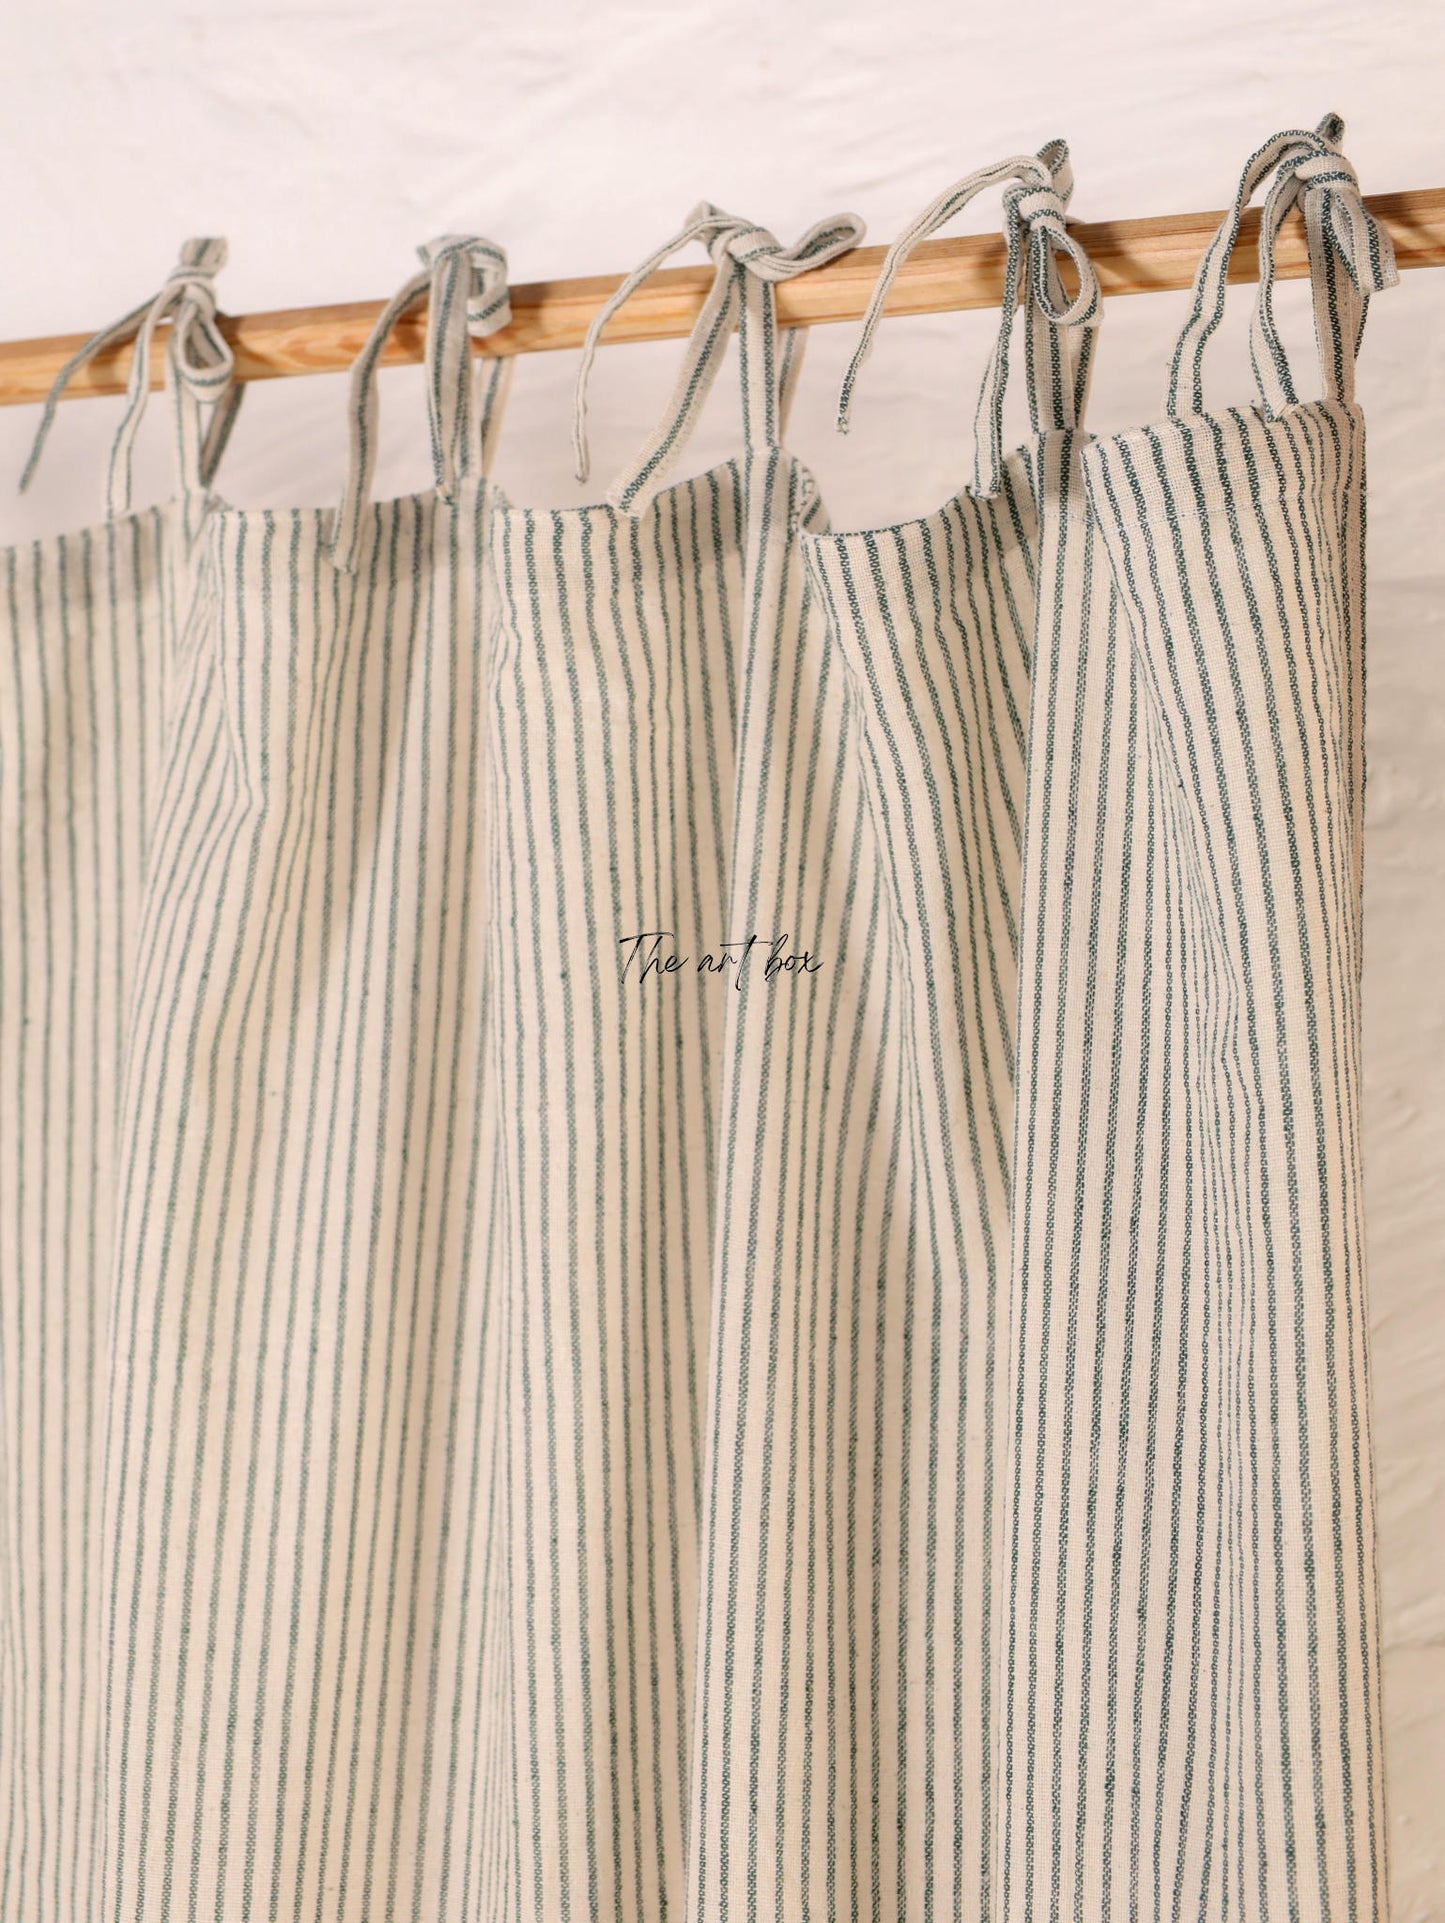 Linen Gauze with Grey Stripes Curtains- 2 Panel set